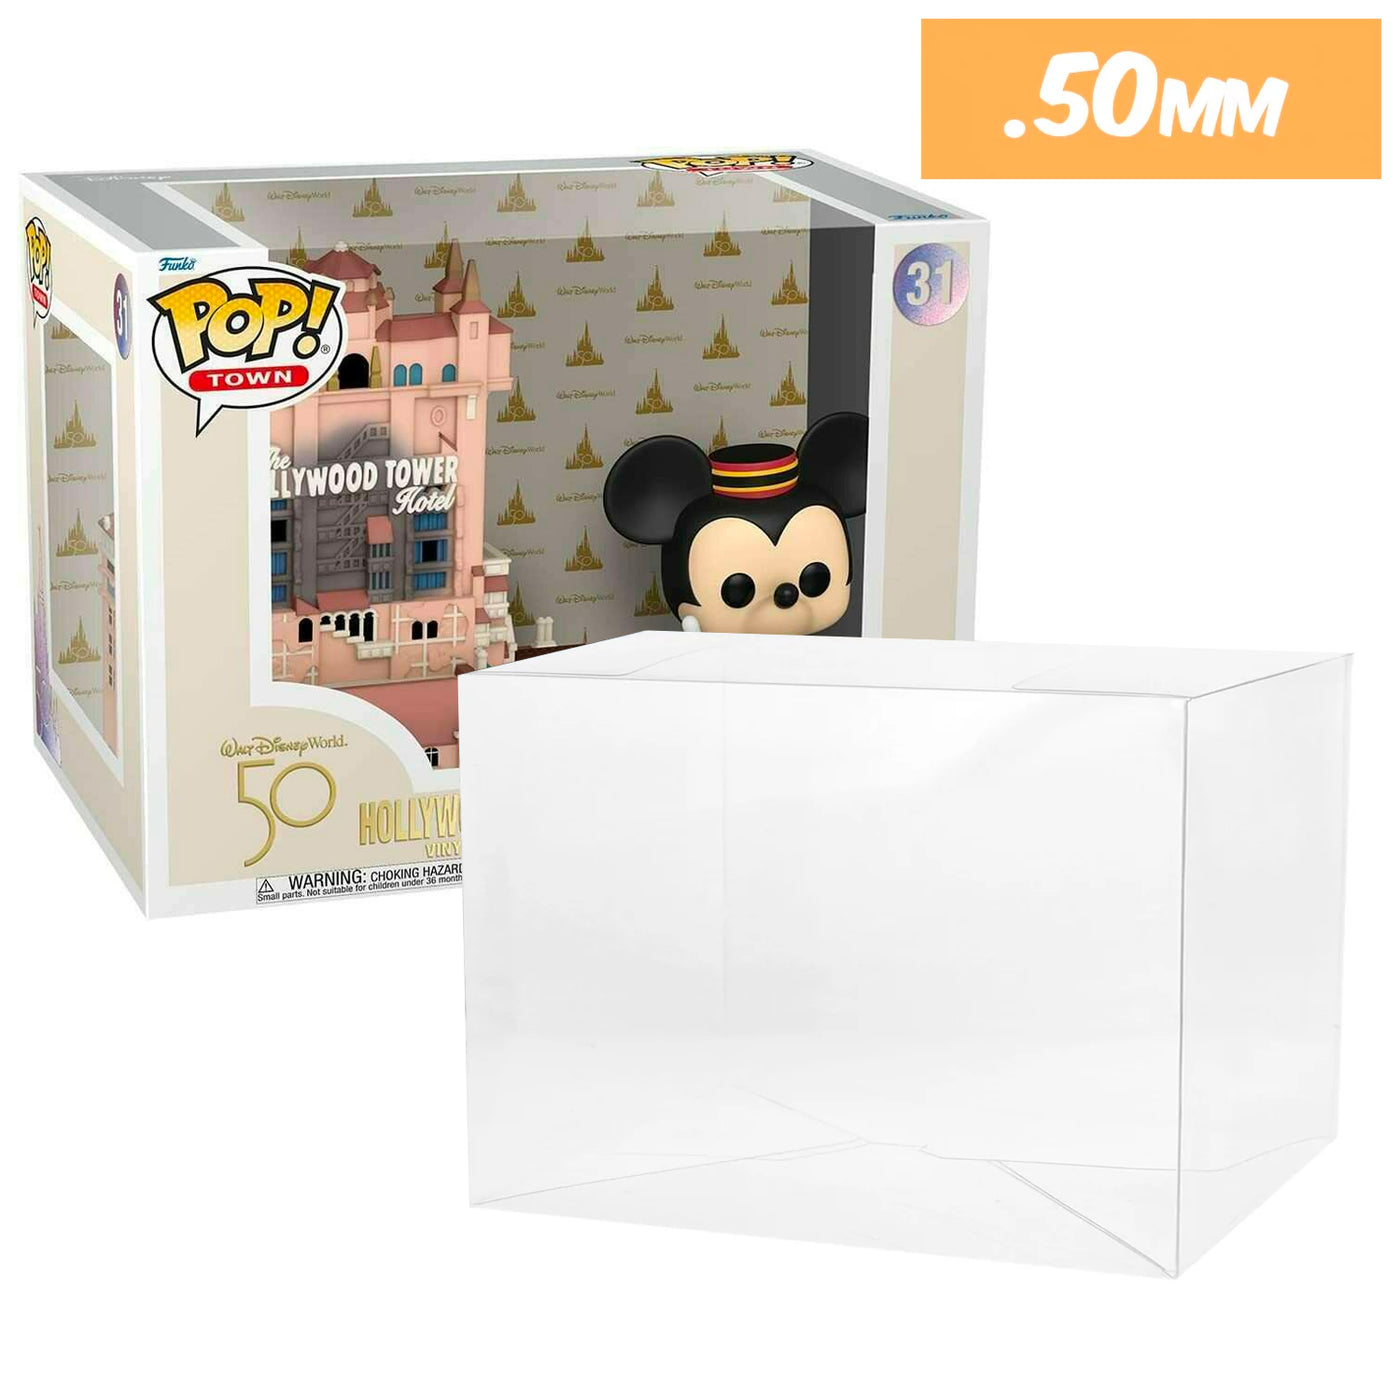 Disney Hollywood Tower and Mickey Mouse pop town best funko pop protectors thick strong uv scratch flat top stack vinyl display geek plastic shield vaulted eco armor fits collect protect display case kollector protector